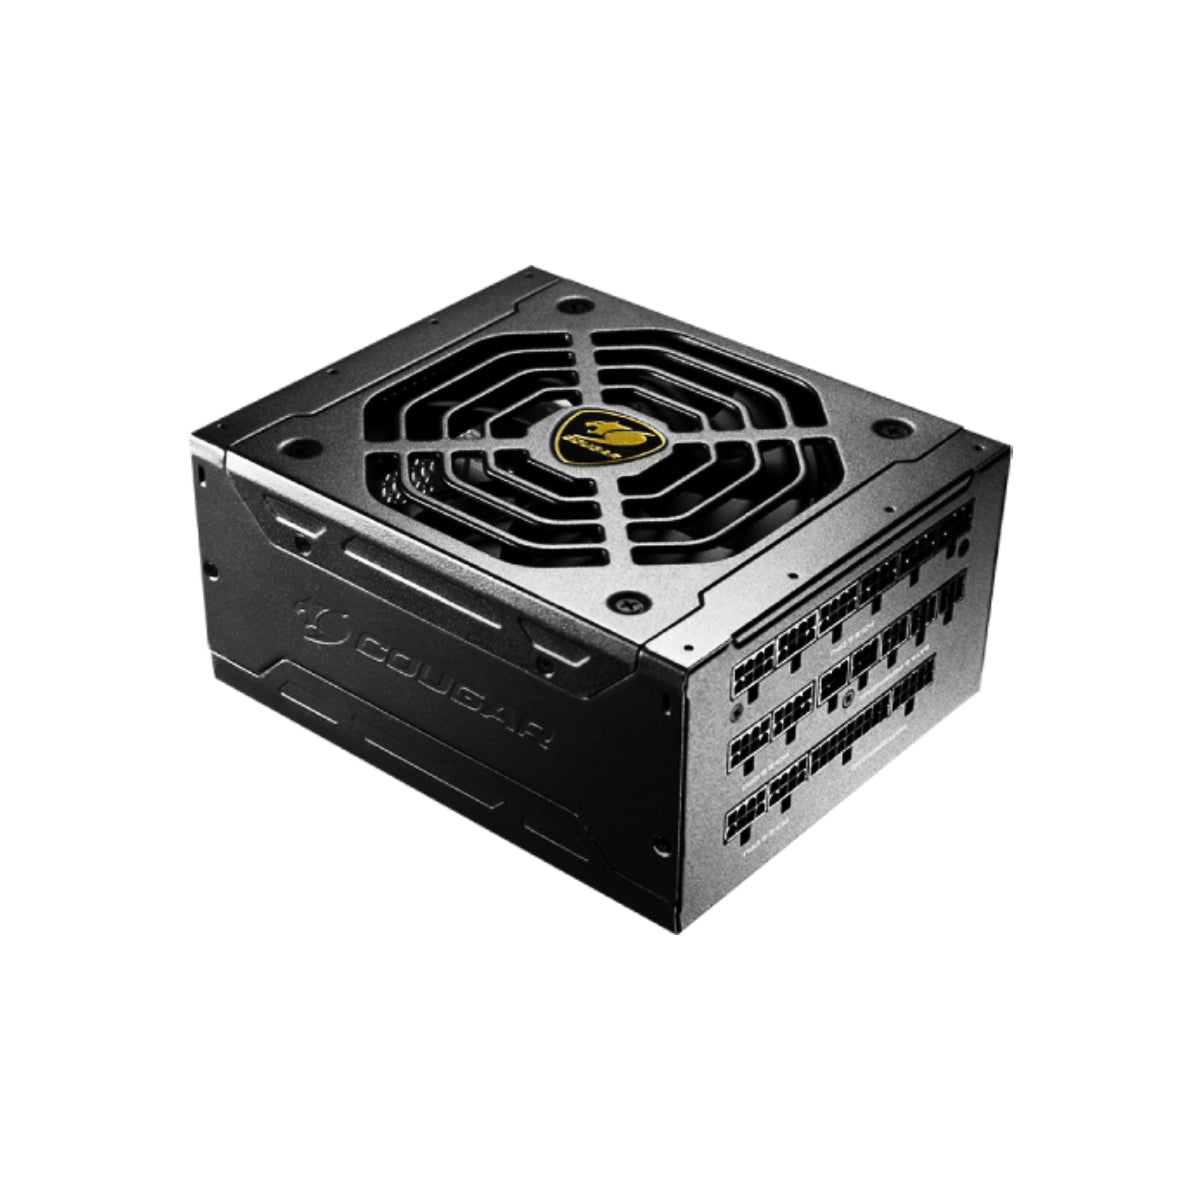 Cougar GEX 1050W 80+ Gold Fully-Modular Power Supply - Store 974 | ستور ٩٧٤